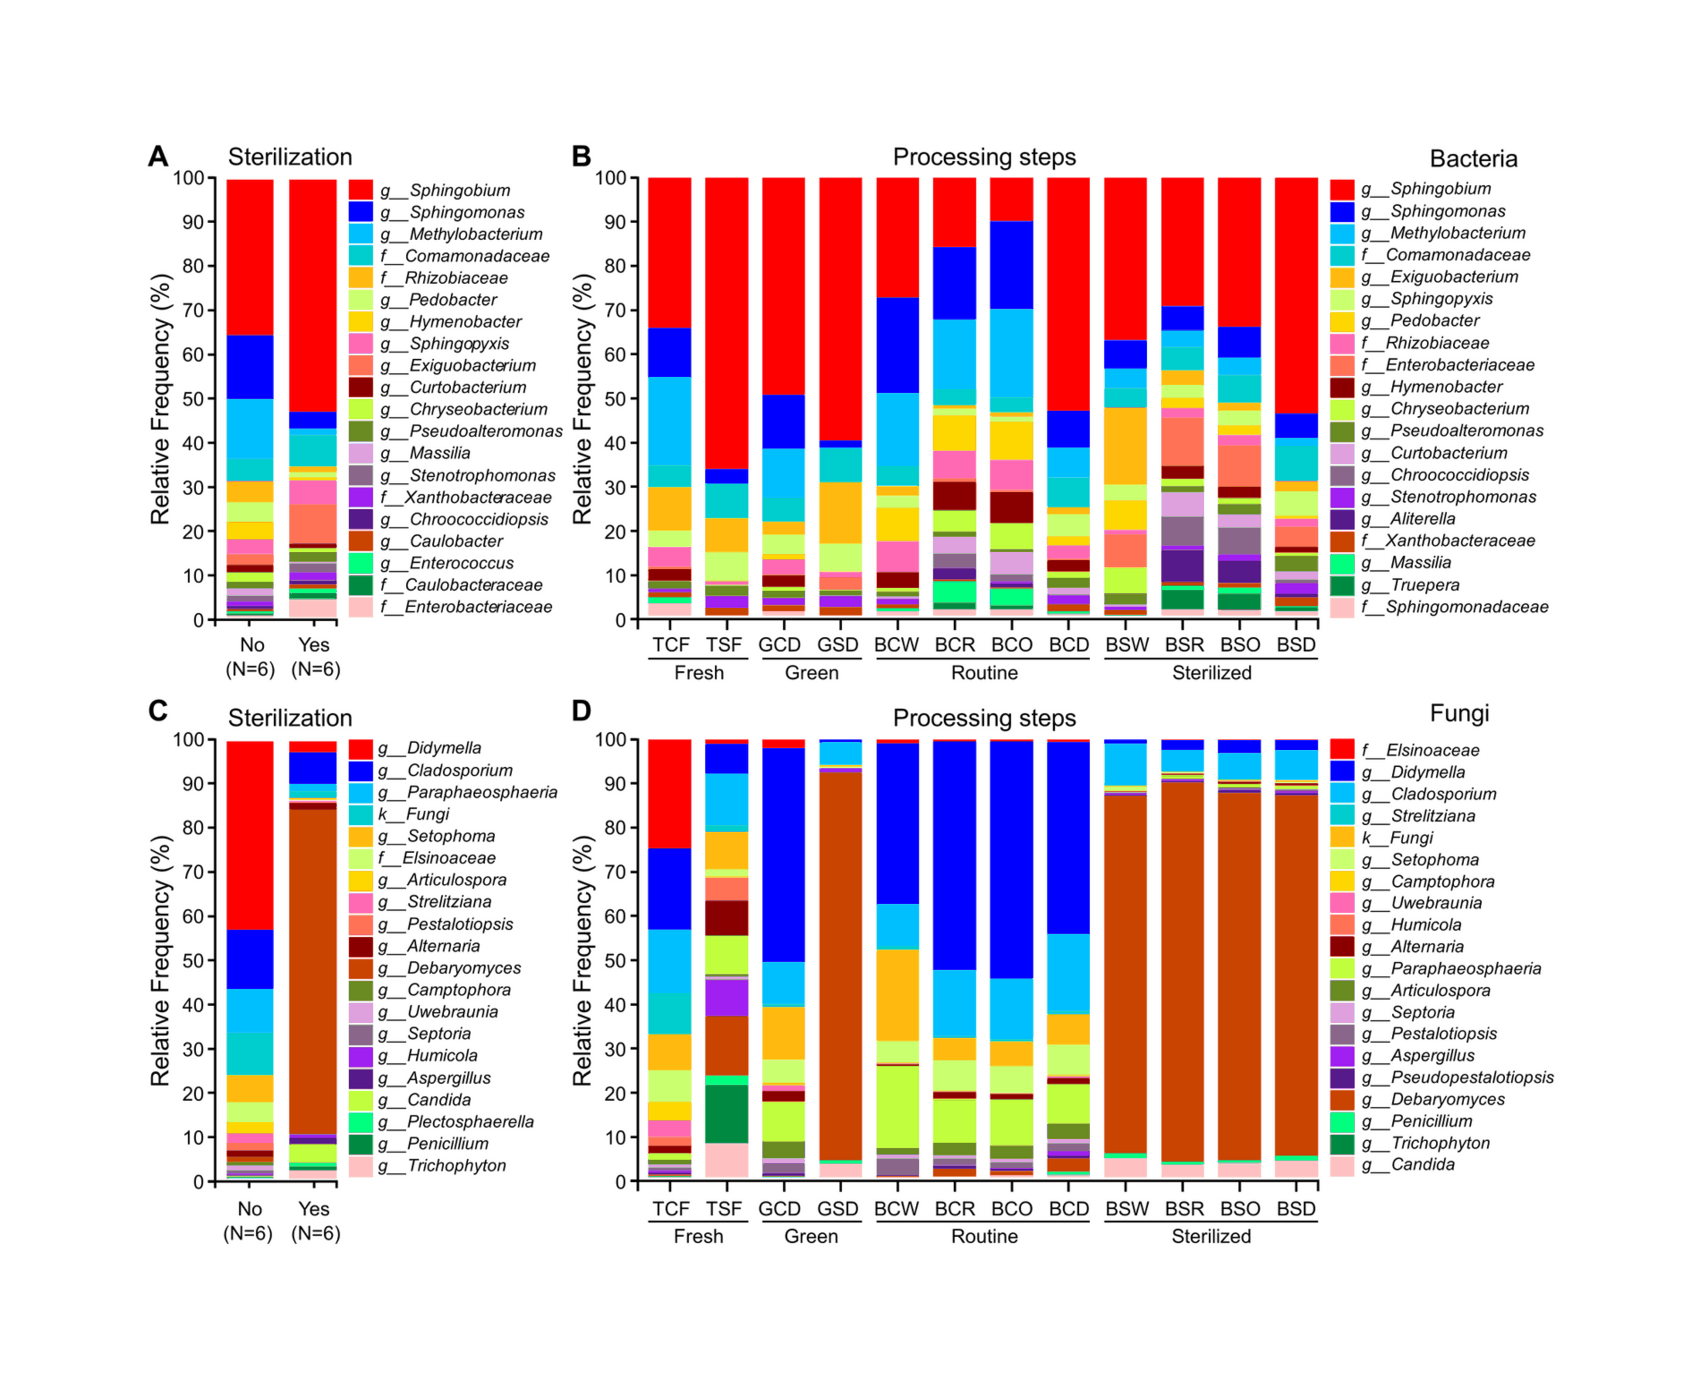 Figure 3: Black and green tea microbiome compositions described at the level of genus. (A) Bacterial composition of routine and sterilized samples. (B) Relative abundance of bacteria in all the black and green tea samples from the processing steps. (C) Relative abundance of fungi between routine and sterilized groups. (D) Sample-wise relative abundances of fungi from the different processing steps. Fresh, fresh leaves before processing; Green, samples of green tea; Routine, routine processing samples of black tea; Sterilized, samples of black tea after leaf surface sterilization.